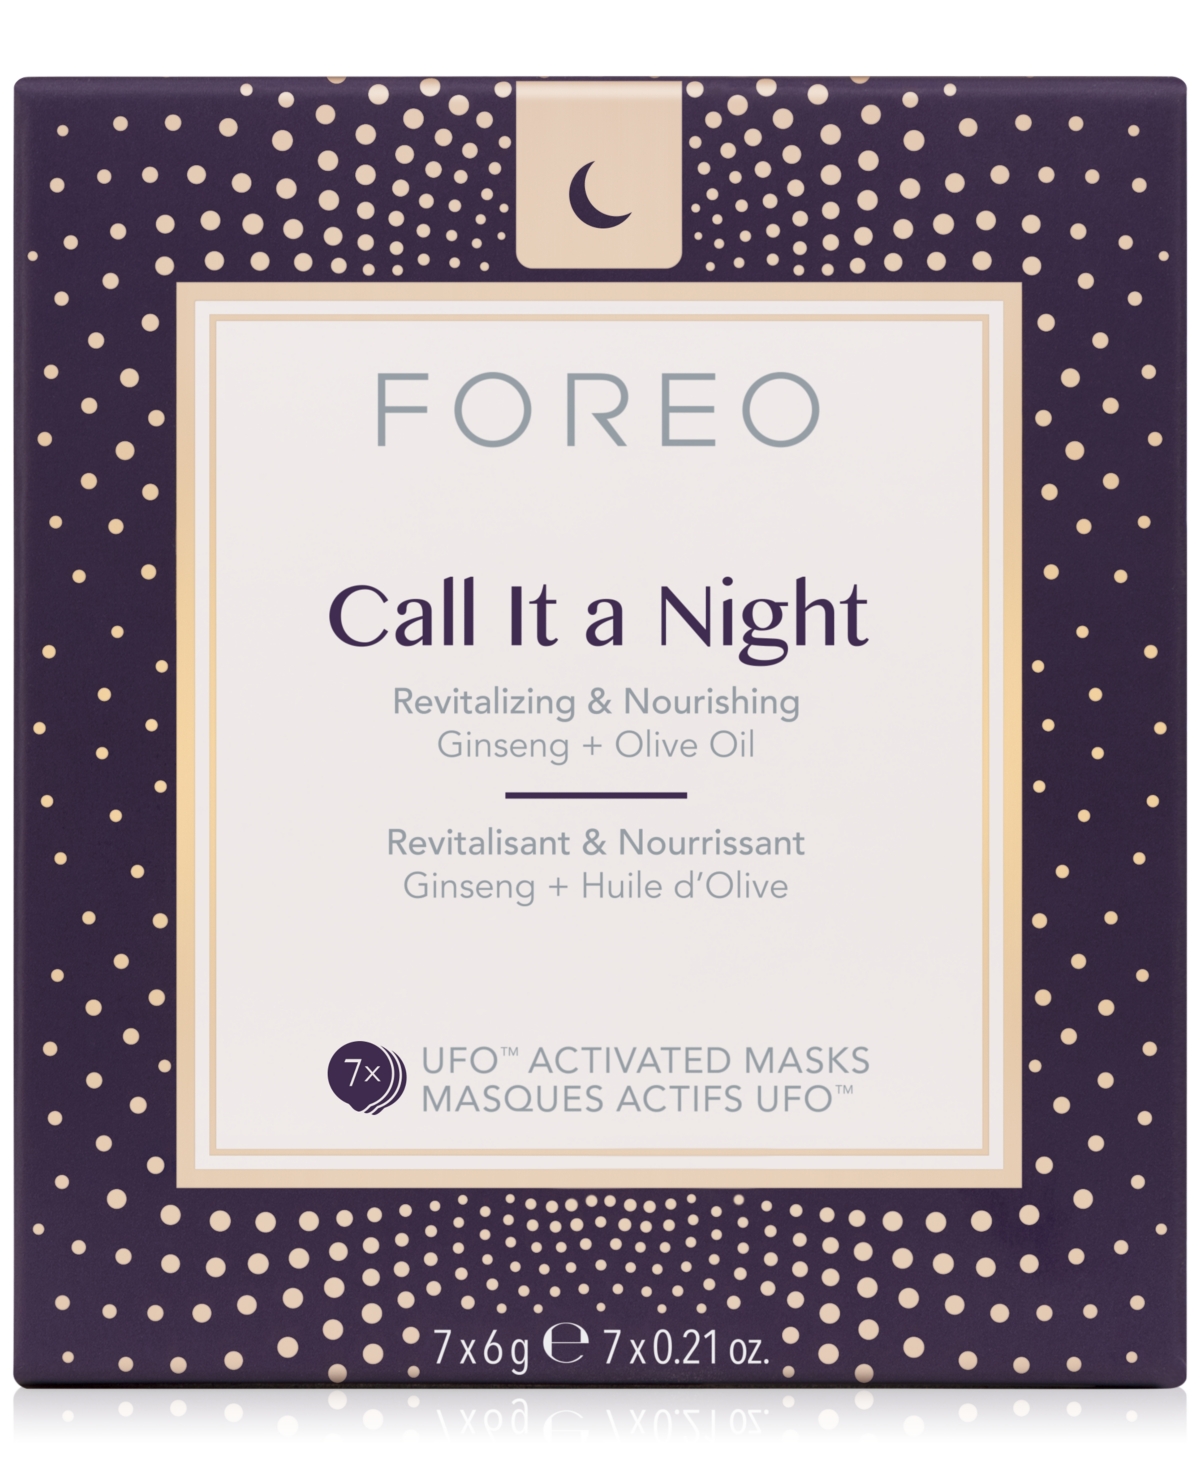 Foreo Call It A Night Ufo Activated Masks, 7-Pk.